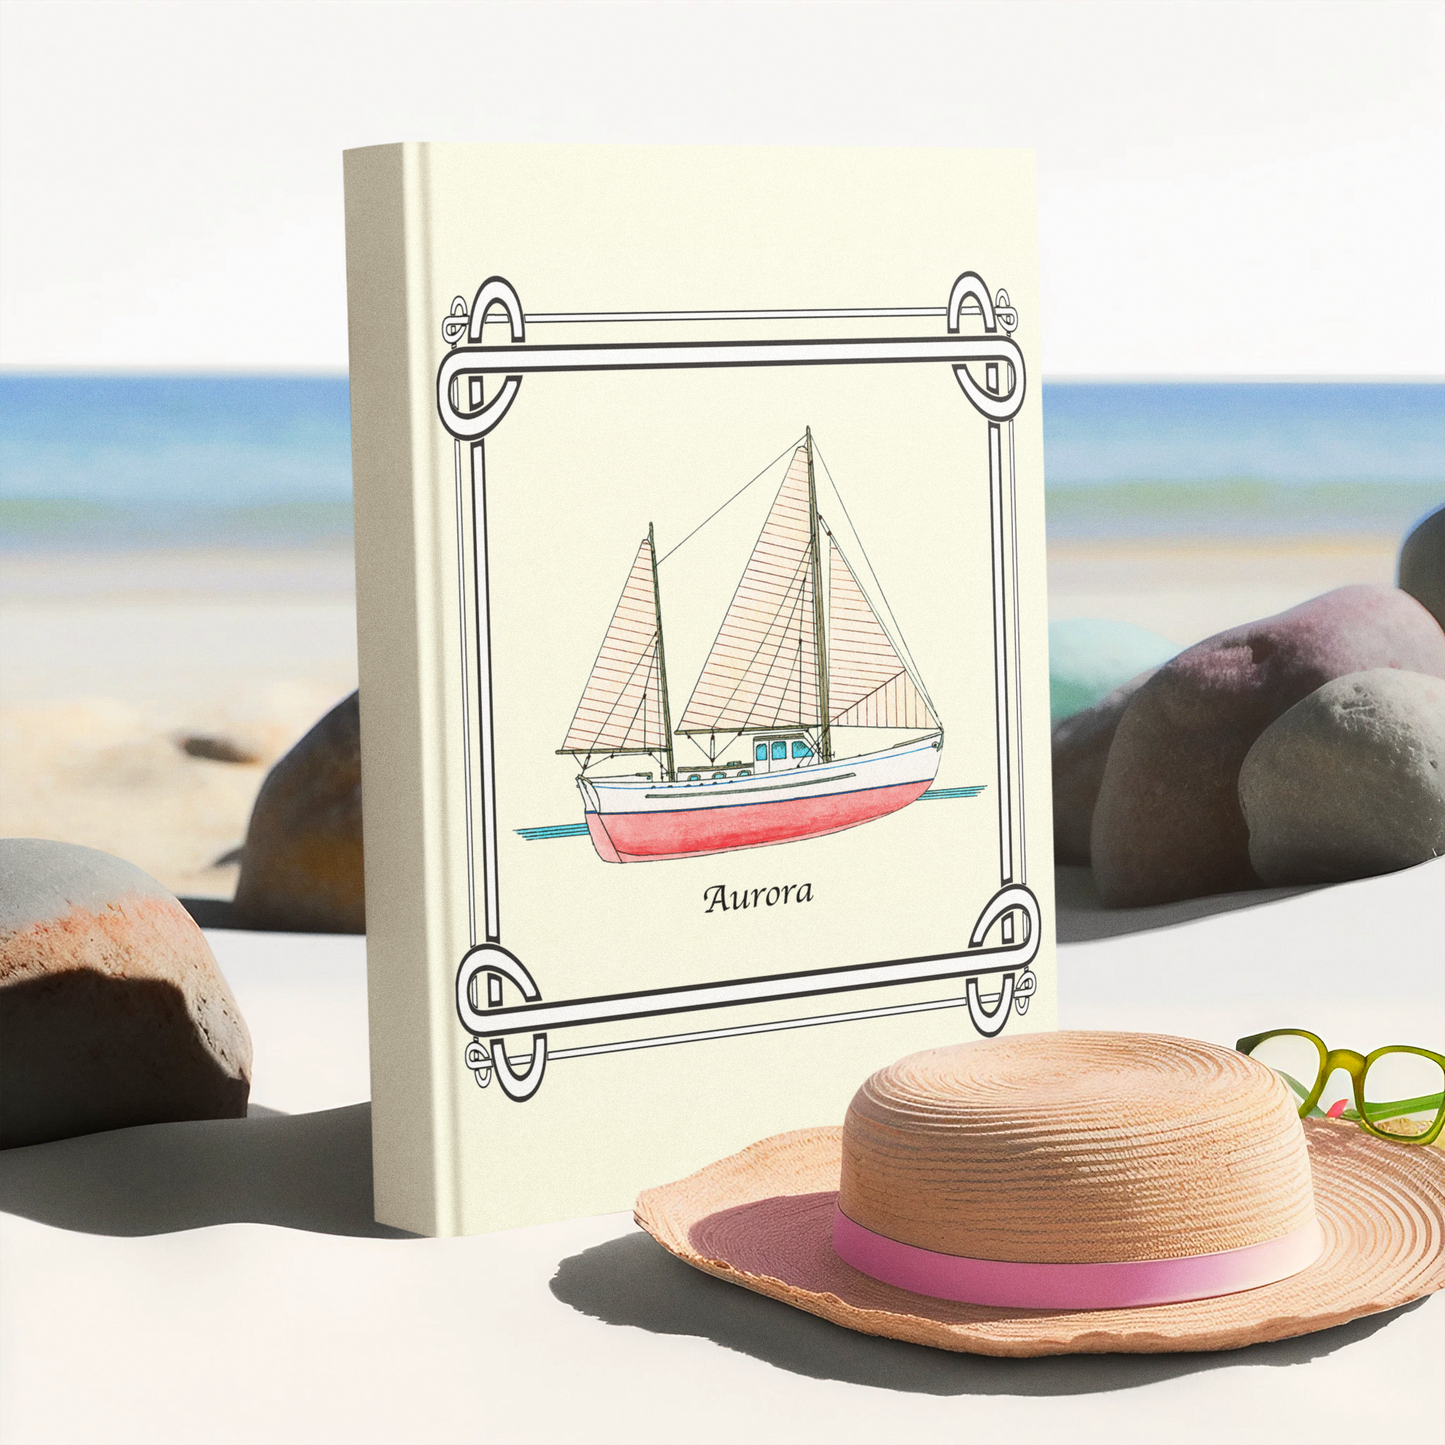 The Aurora Journal makes a thoughtful gift for the sailing enthusiast